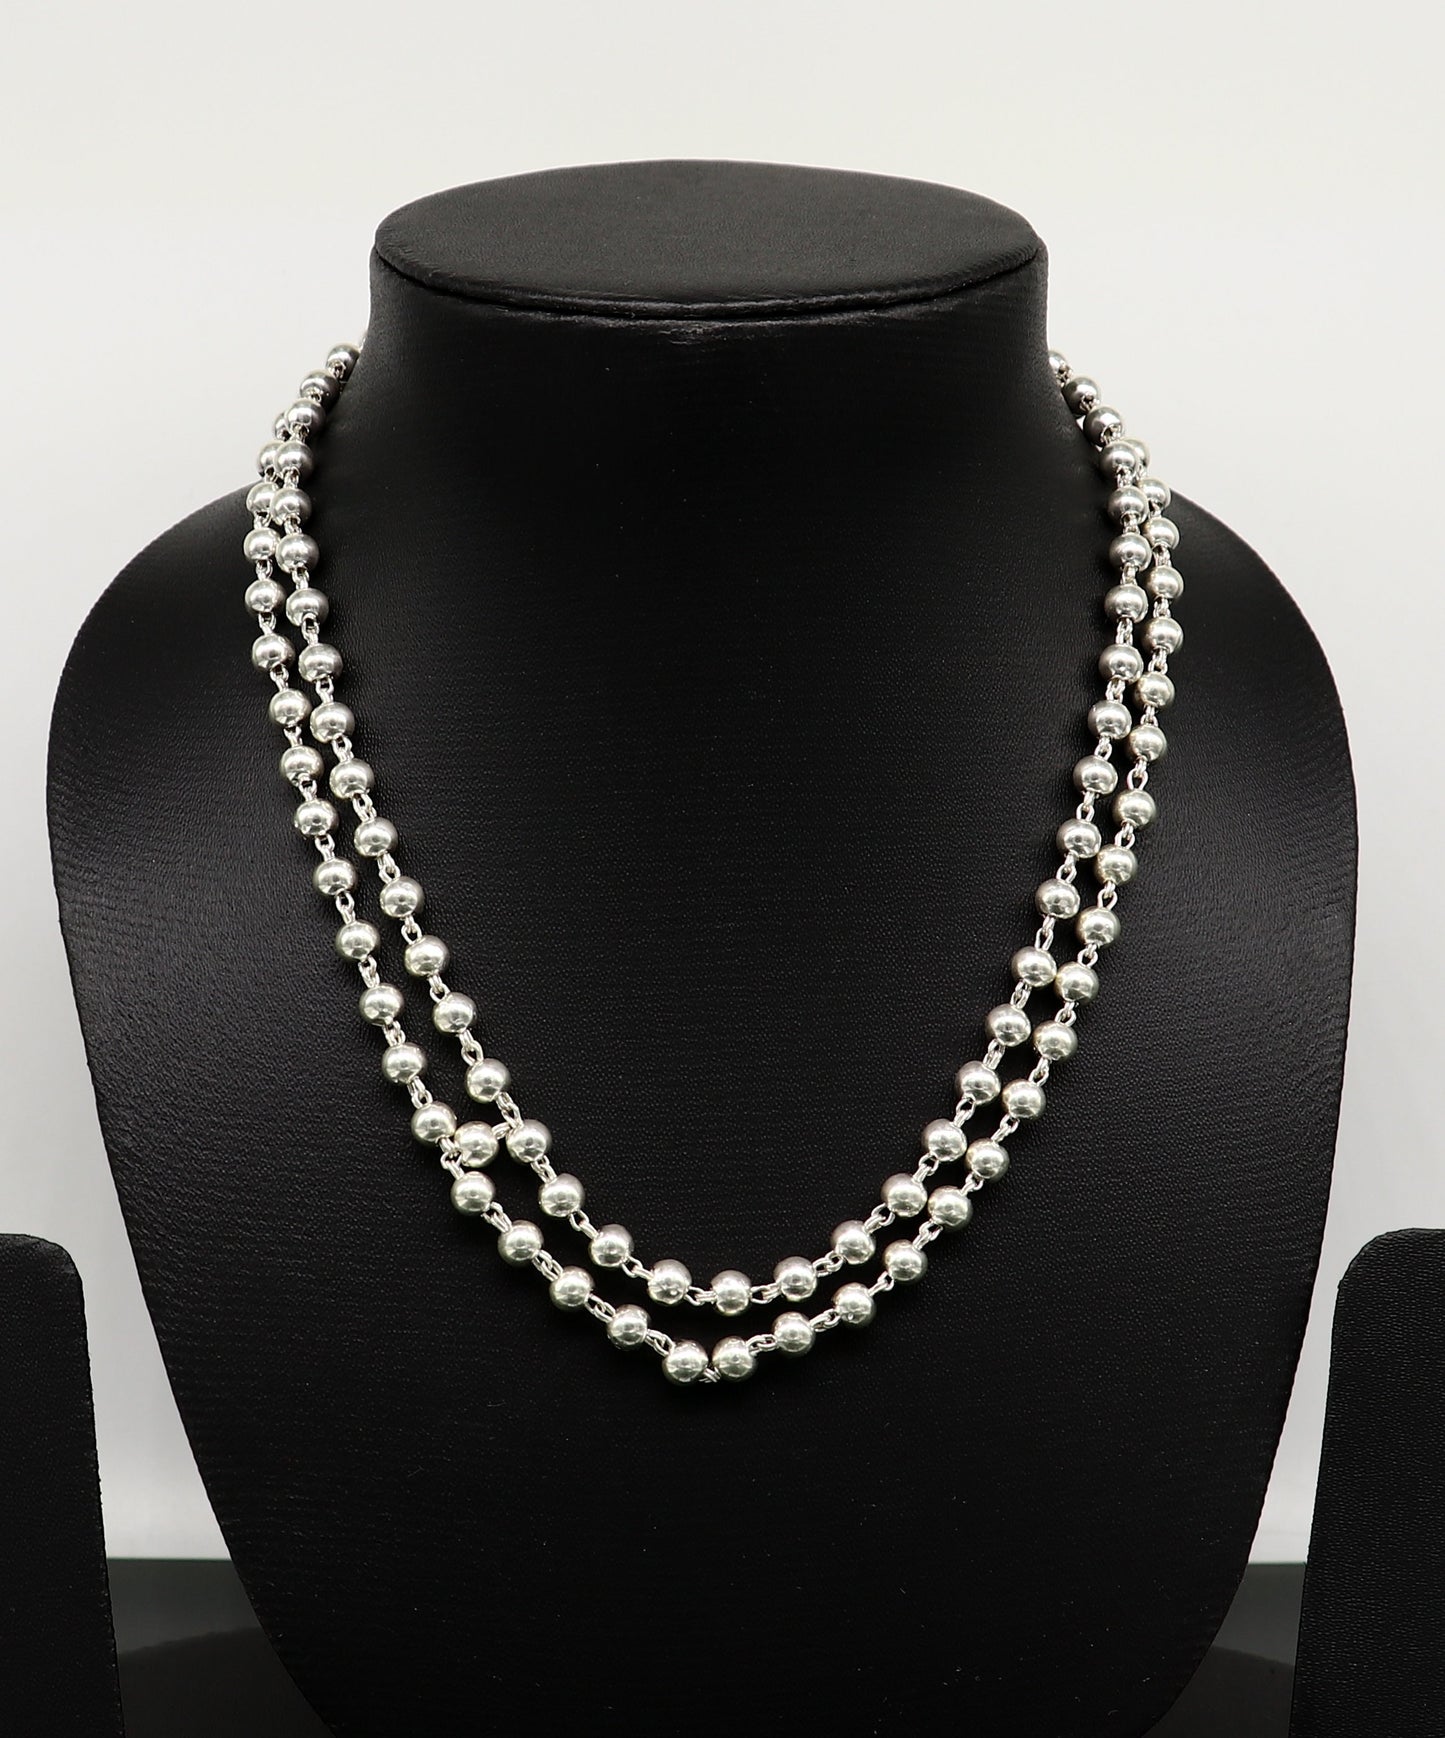 925 sterling silver fabulous plain solid beads chain japp mala 108 beads japp chain fabulous chanting necklace stylish jewelry ch109 - TRIBAL ORNAMENTS